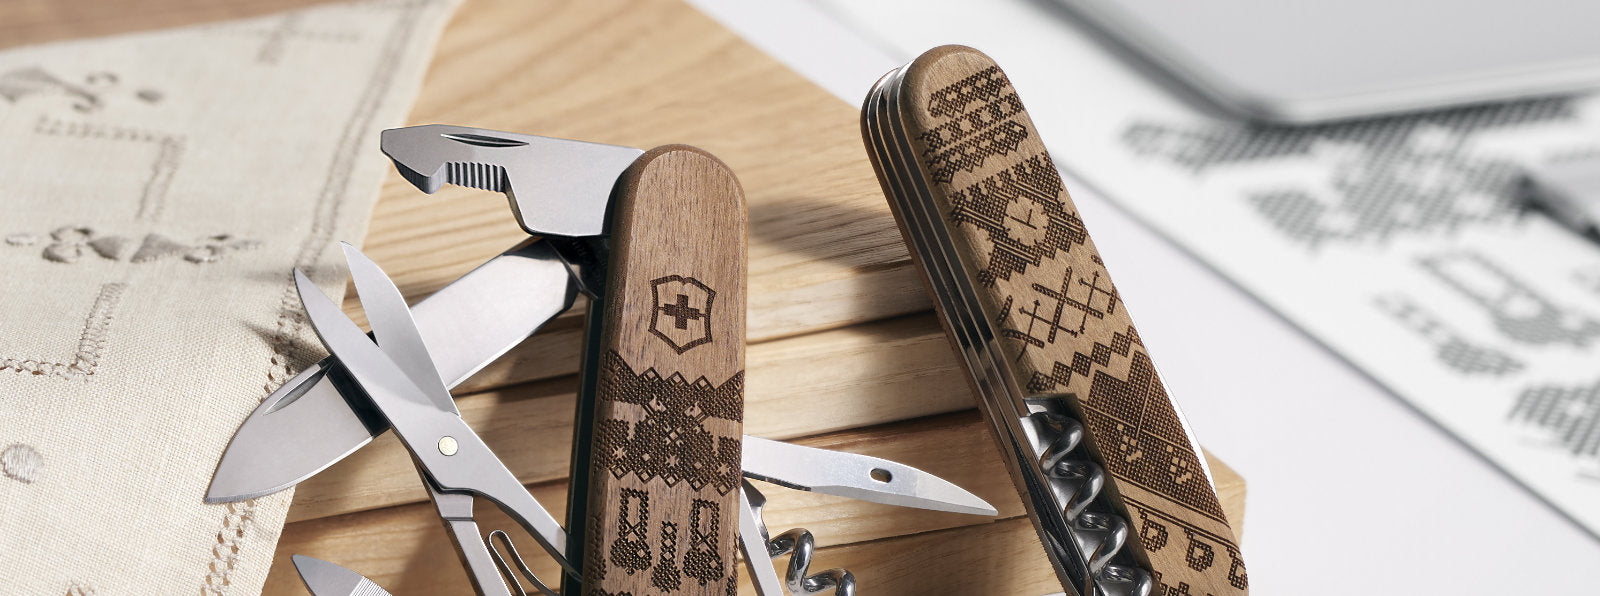 2023 Companion with new package-opener tool - release date April 11? :  r/victorinox